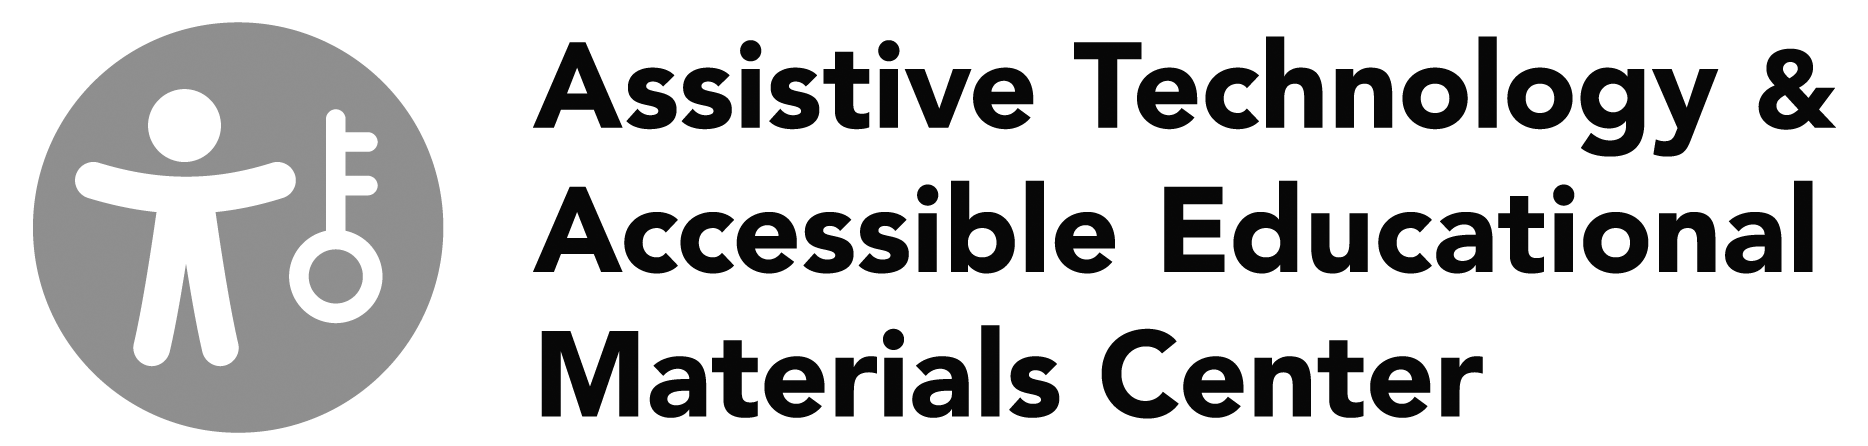 Assistive Technology & Accessible Educational Materials